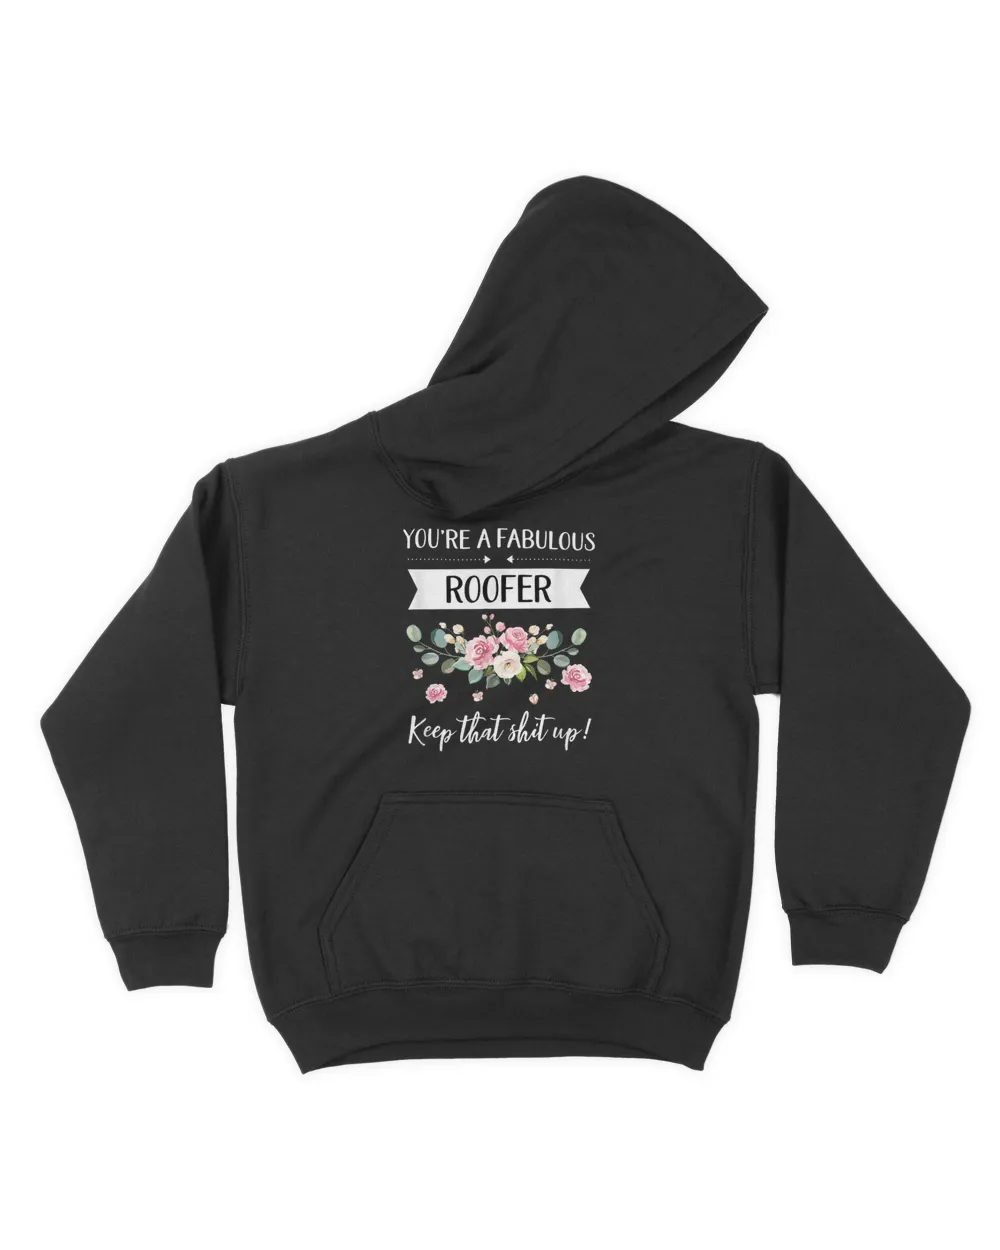 You're A Fabulous Roofer Keep That Shit Up T-Shirt